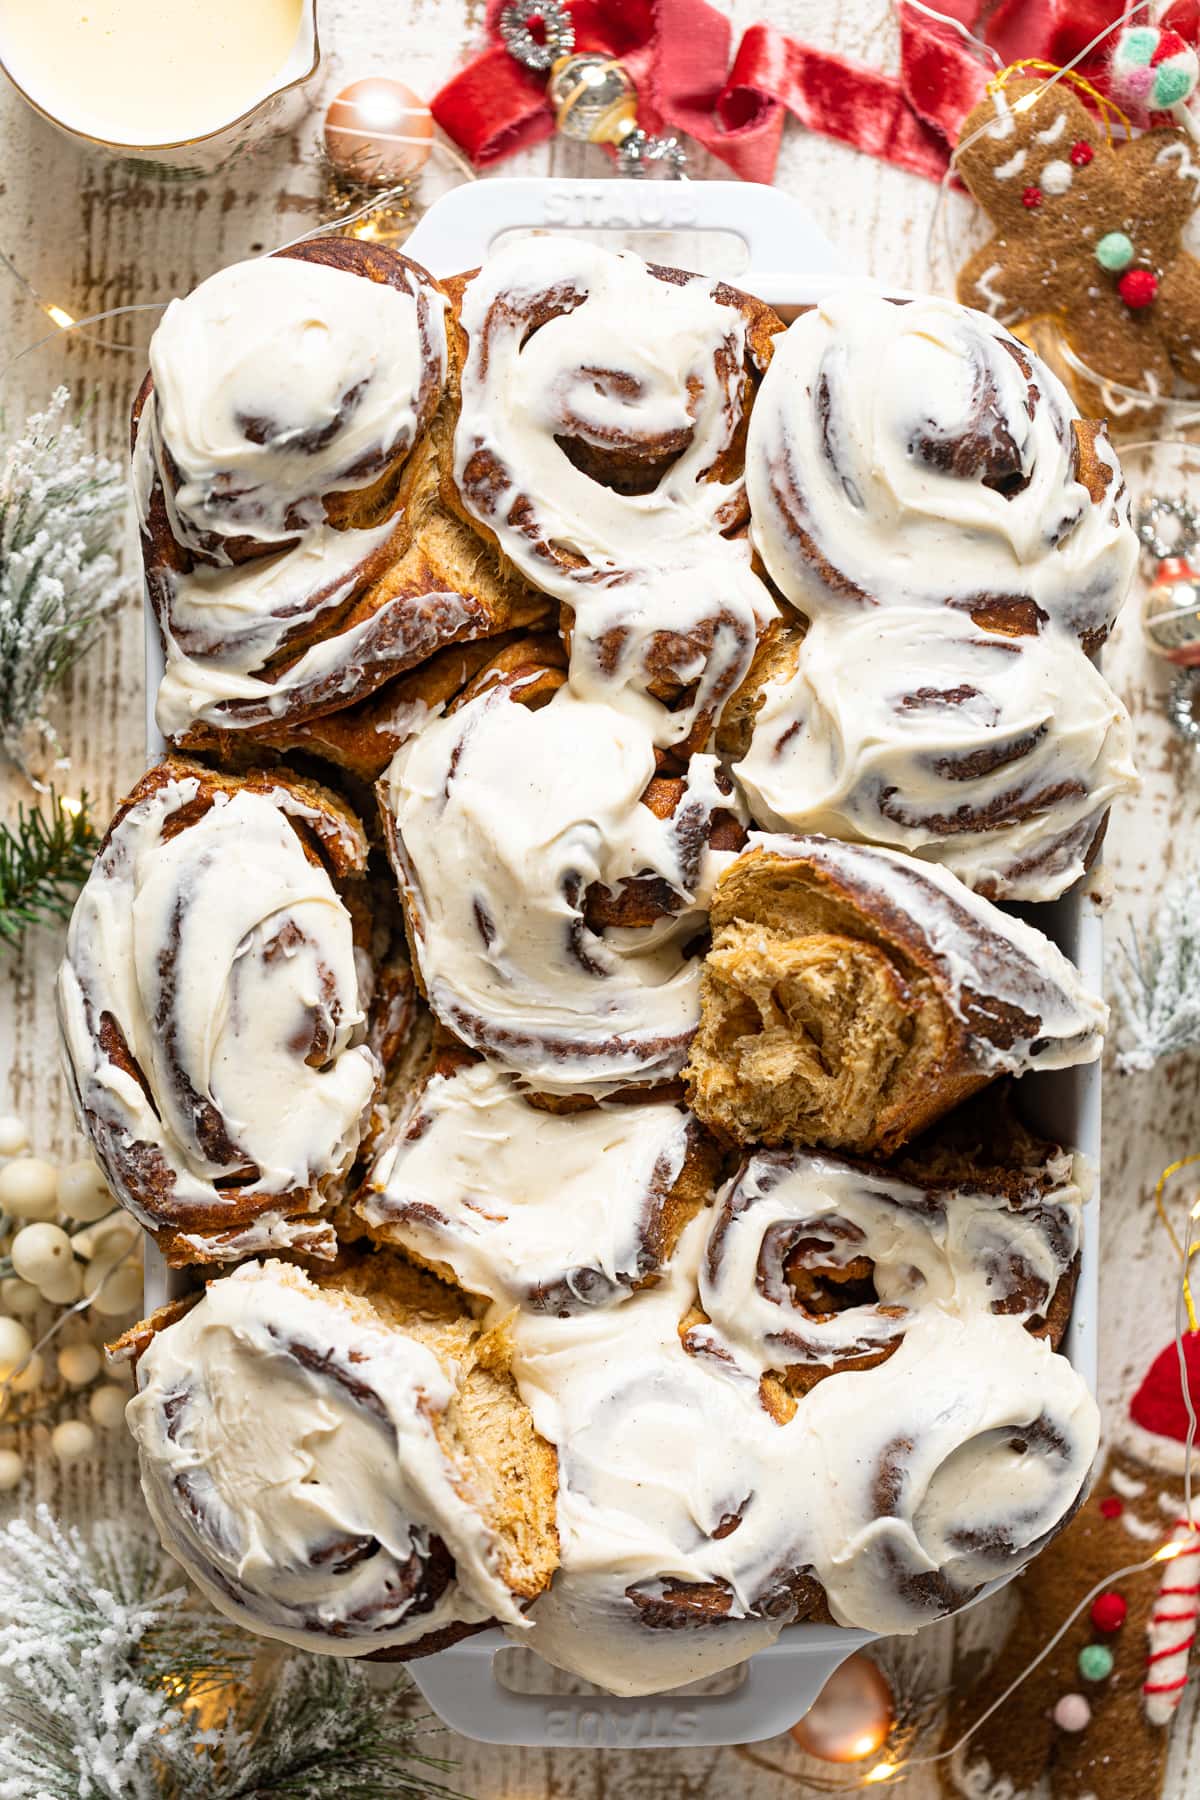 Gingerbread Cinnamon Rolls with Maple Cream Cheese Frosting in a baking pan surrounded by Christmas decorations